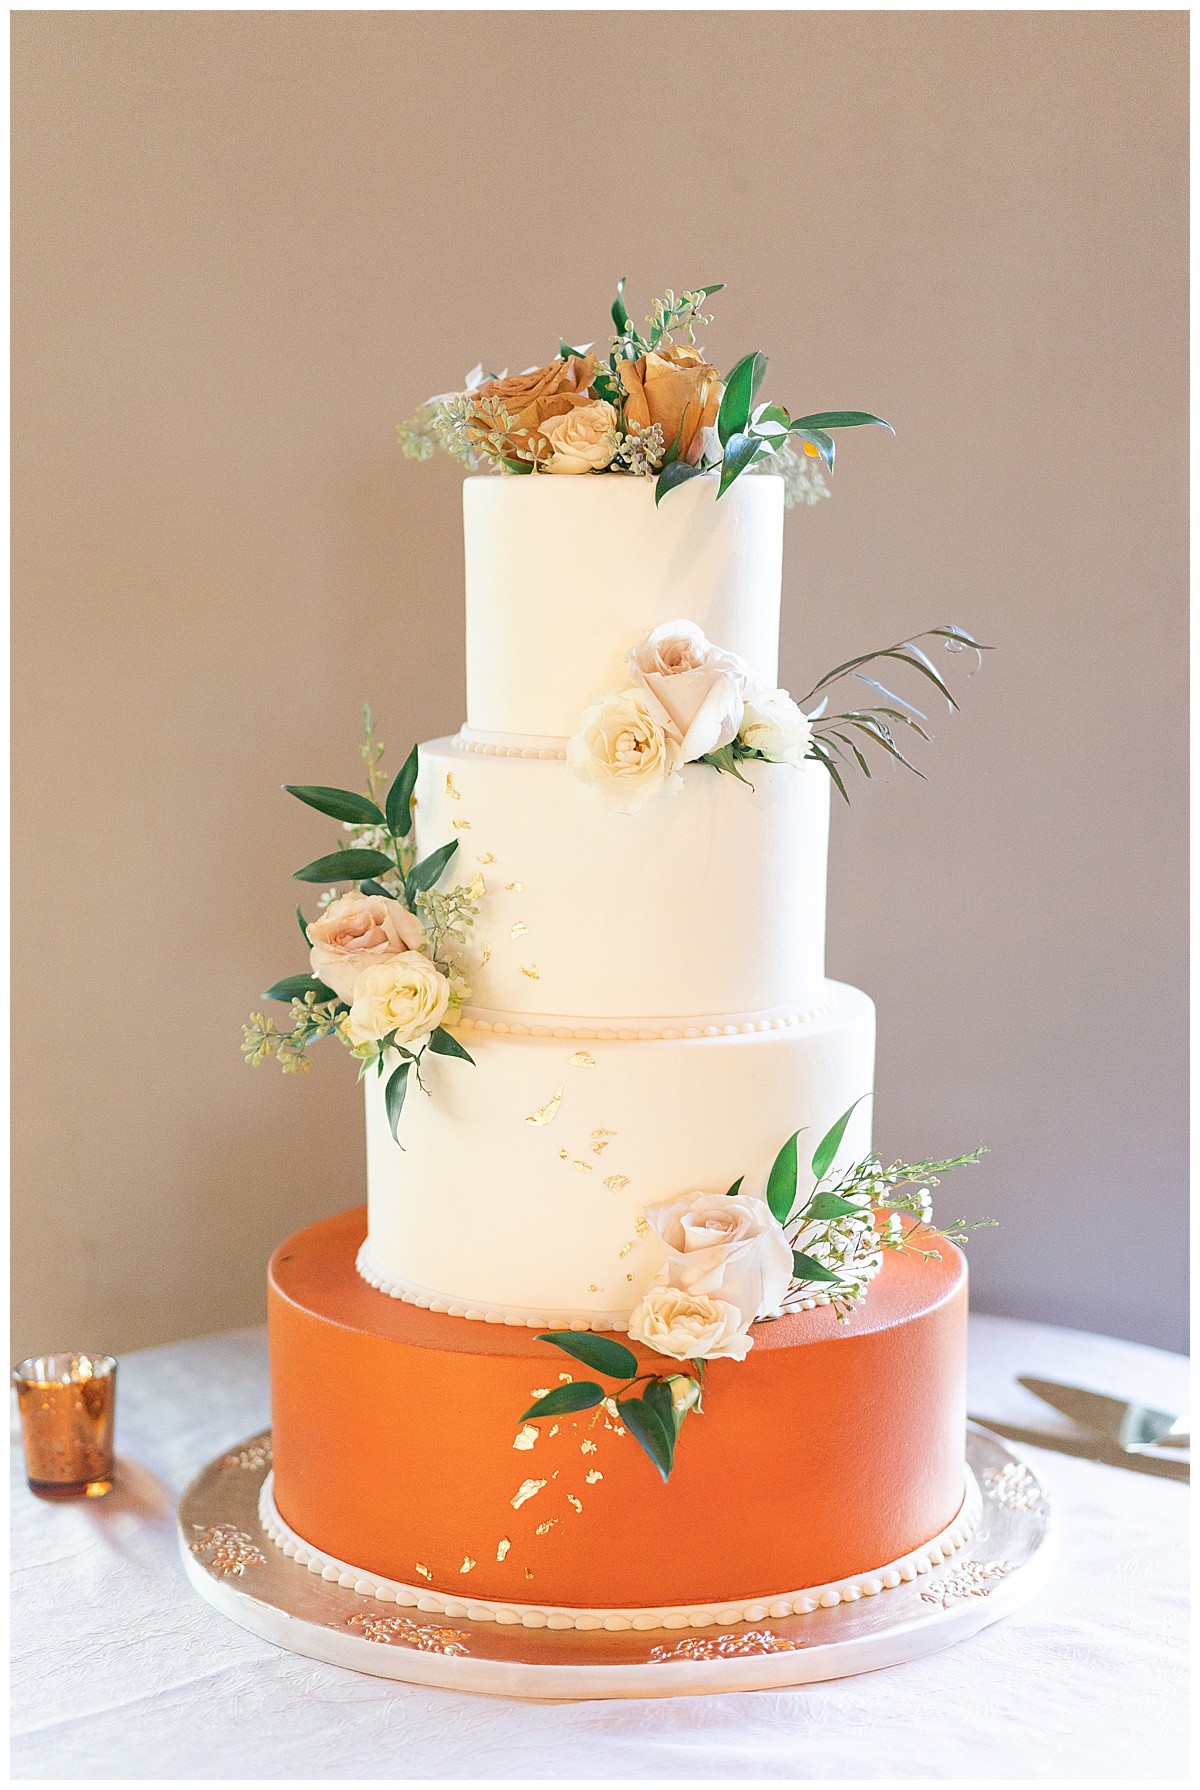 Stunning colorful cake for 70's Inspired Wedding Ideas